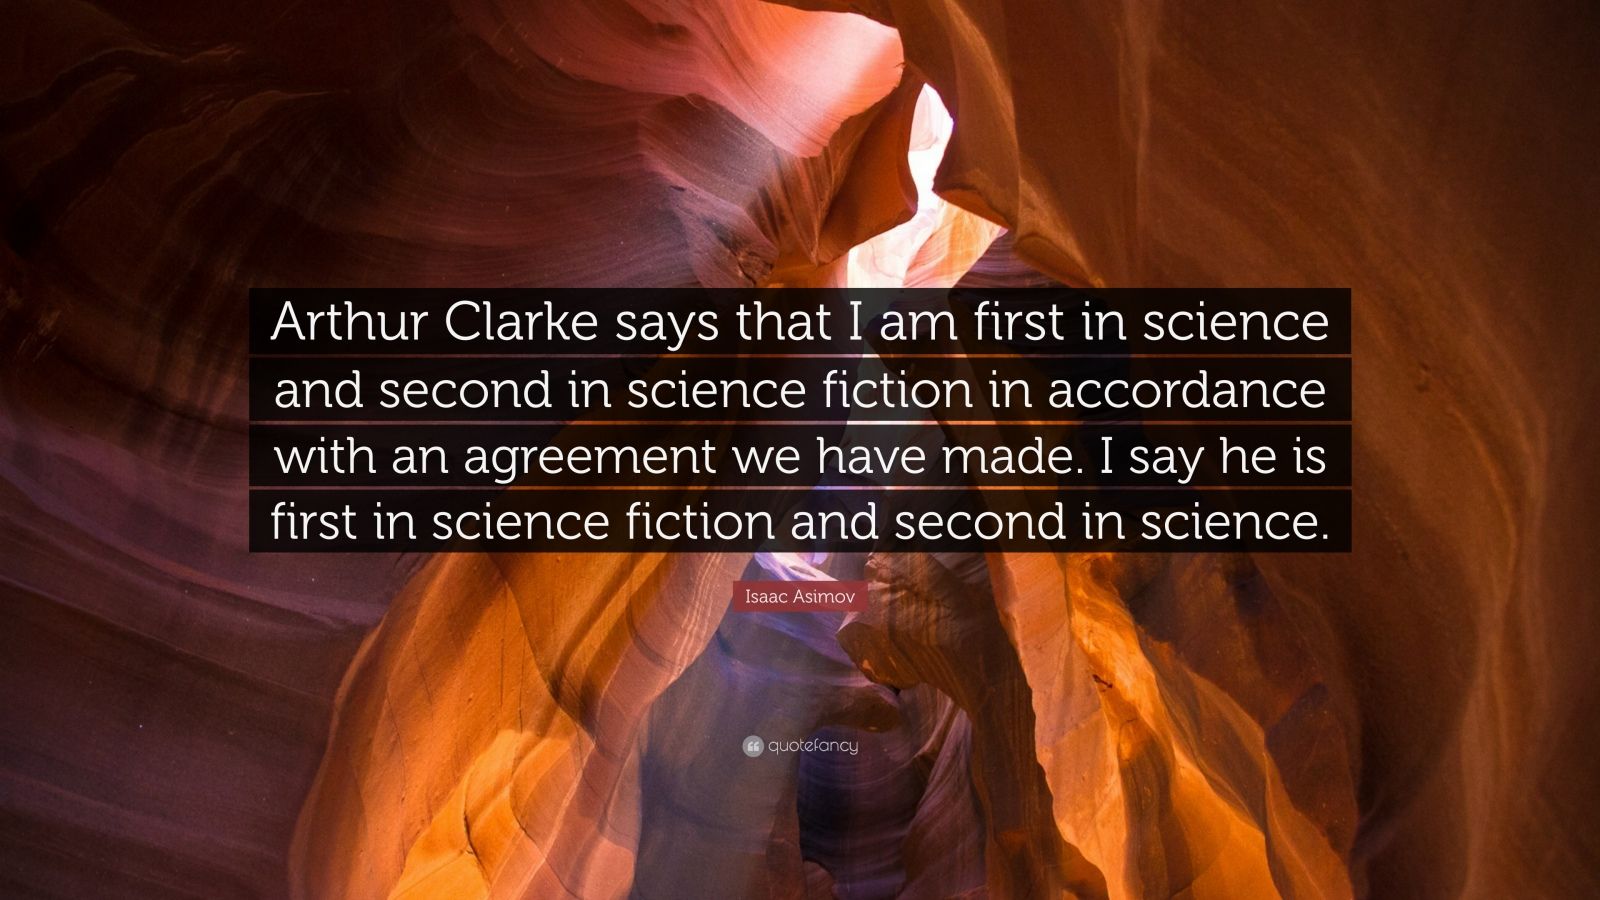 Isaac Asimov Quote “arthur Clarke Says That I Am First In Science And Second In Science Fiction 6746